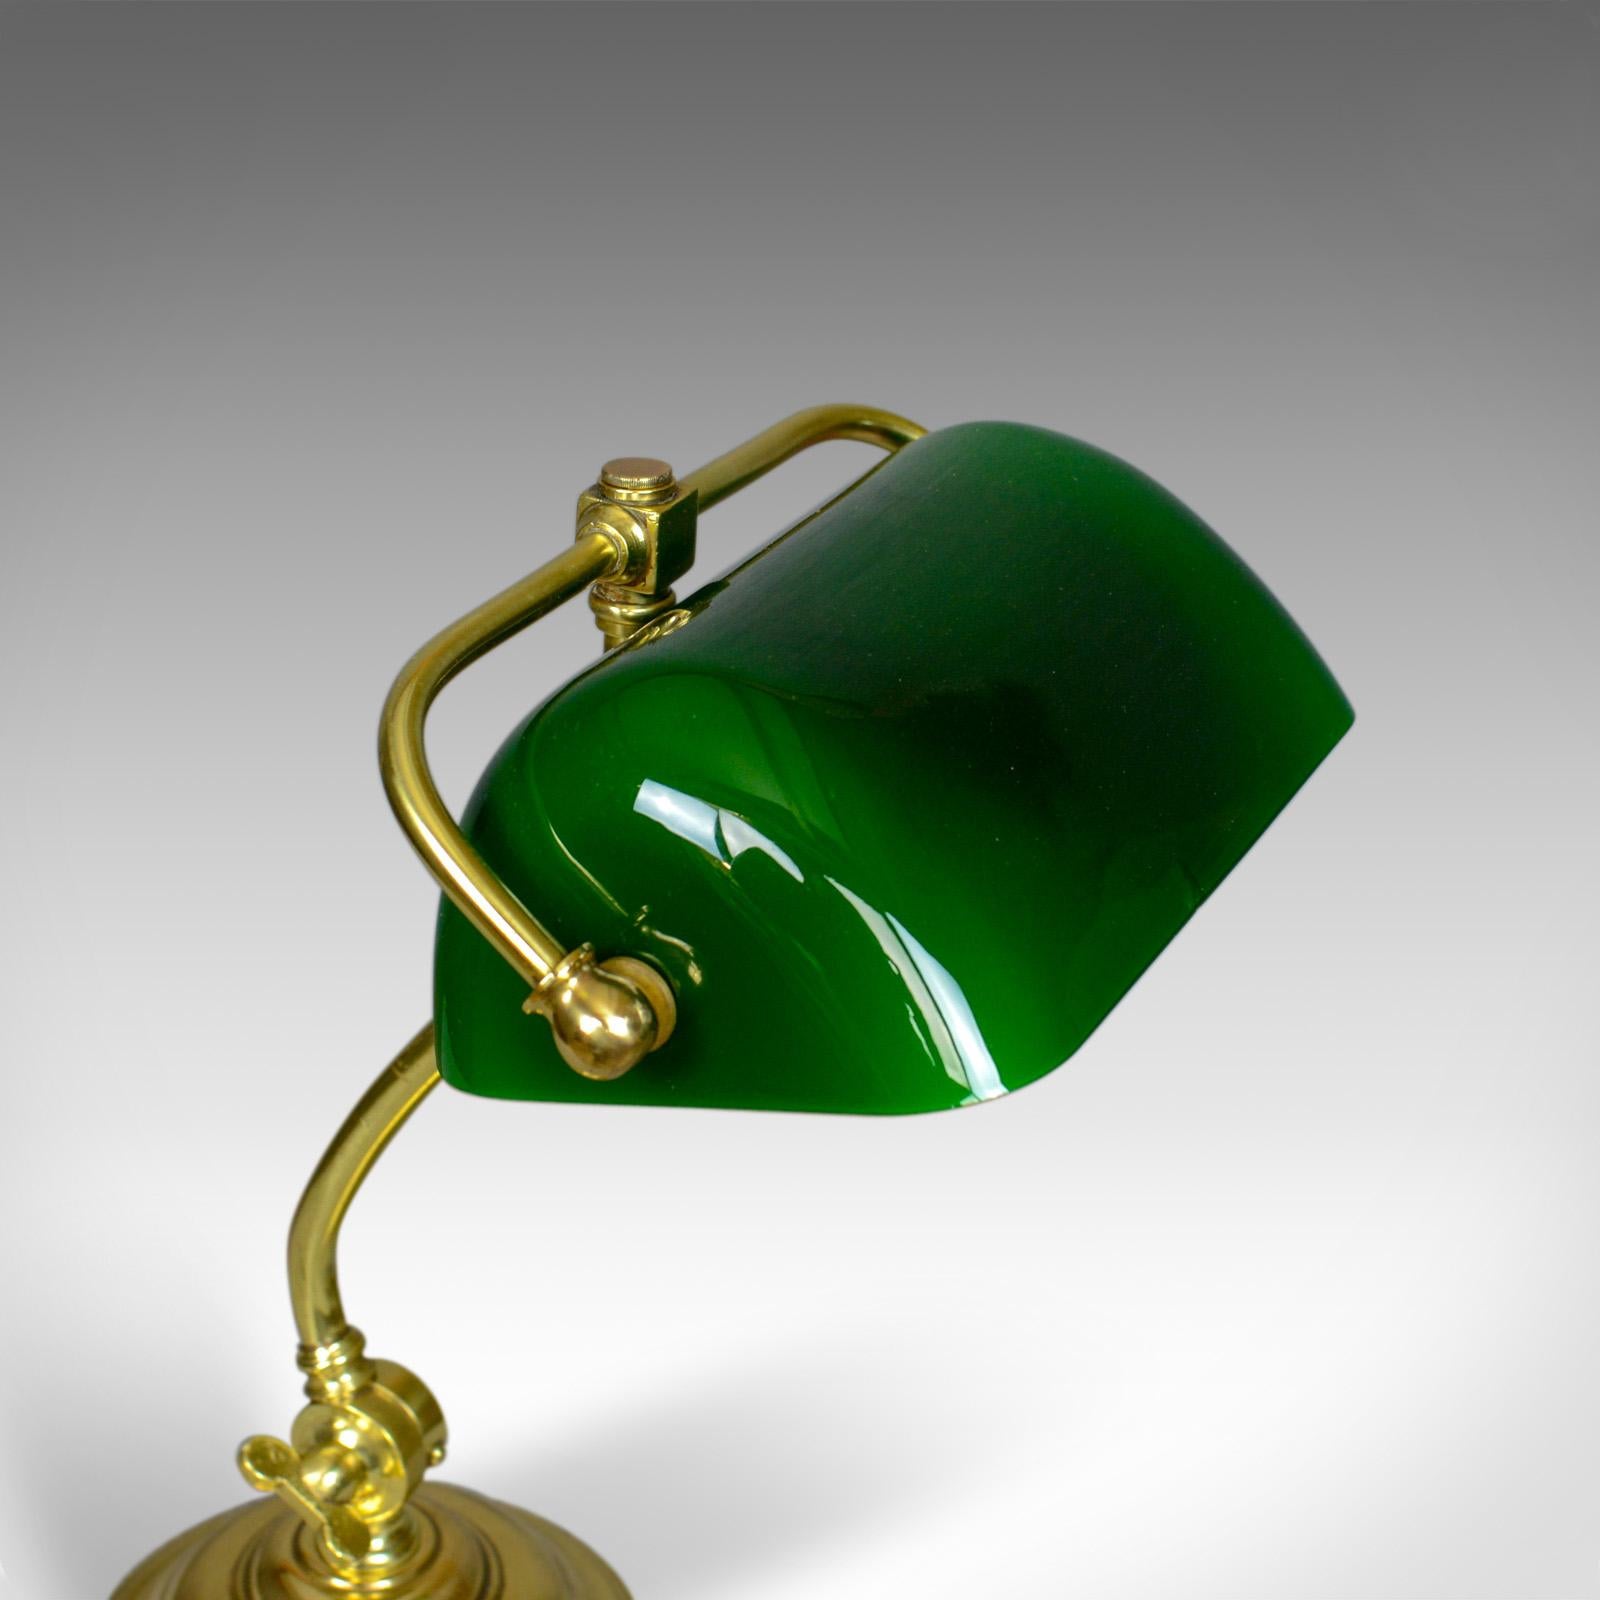 barristers lamp